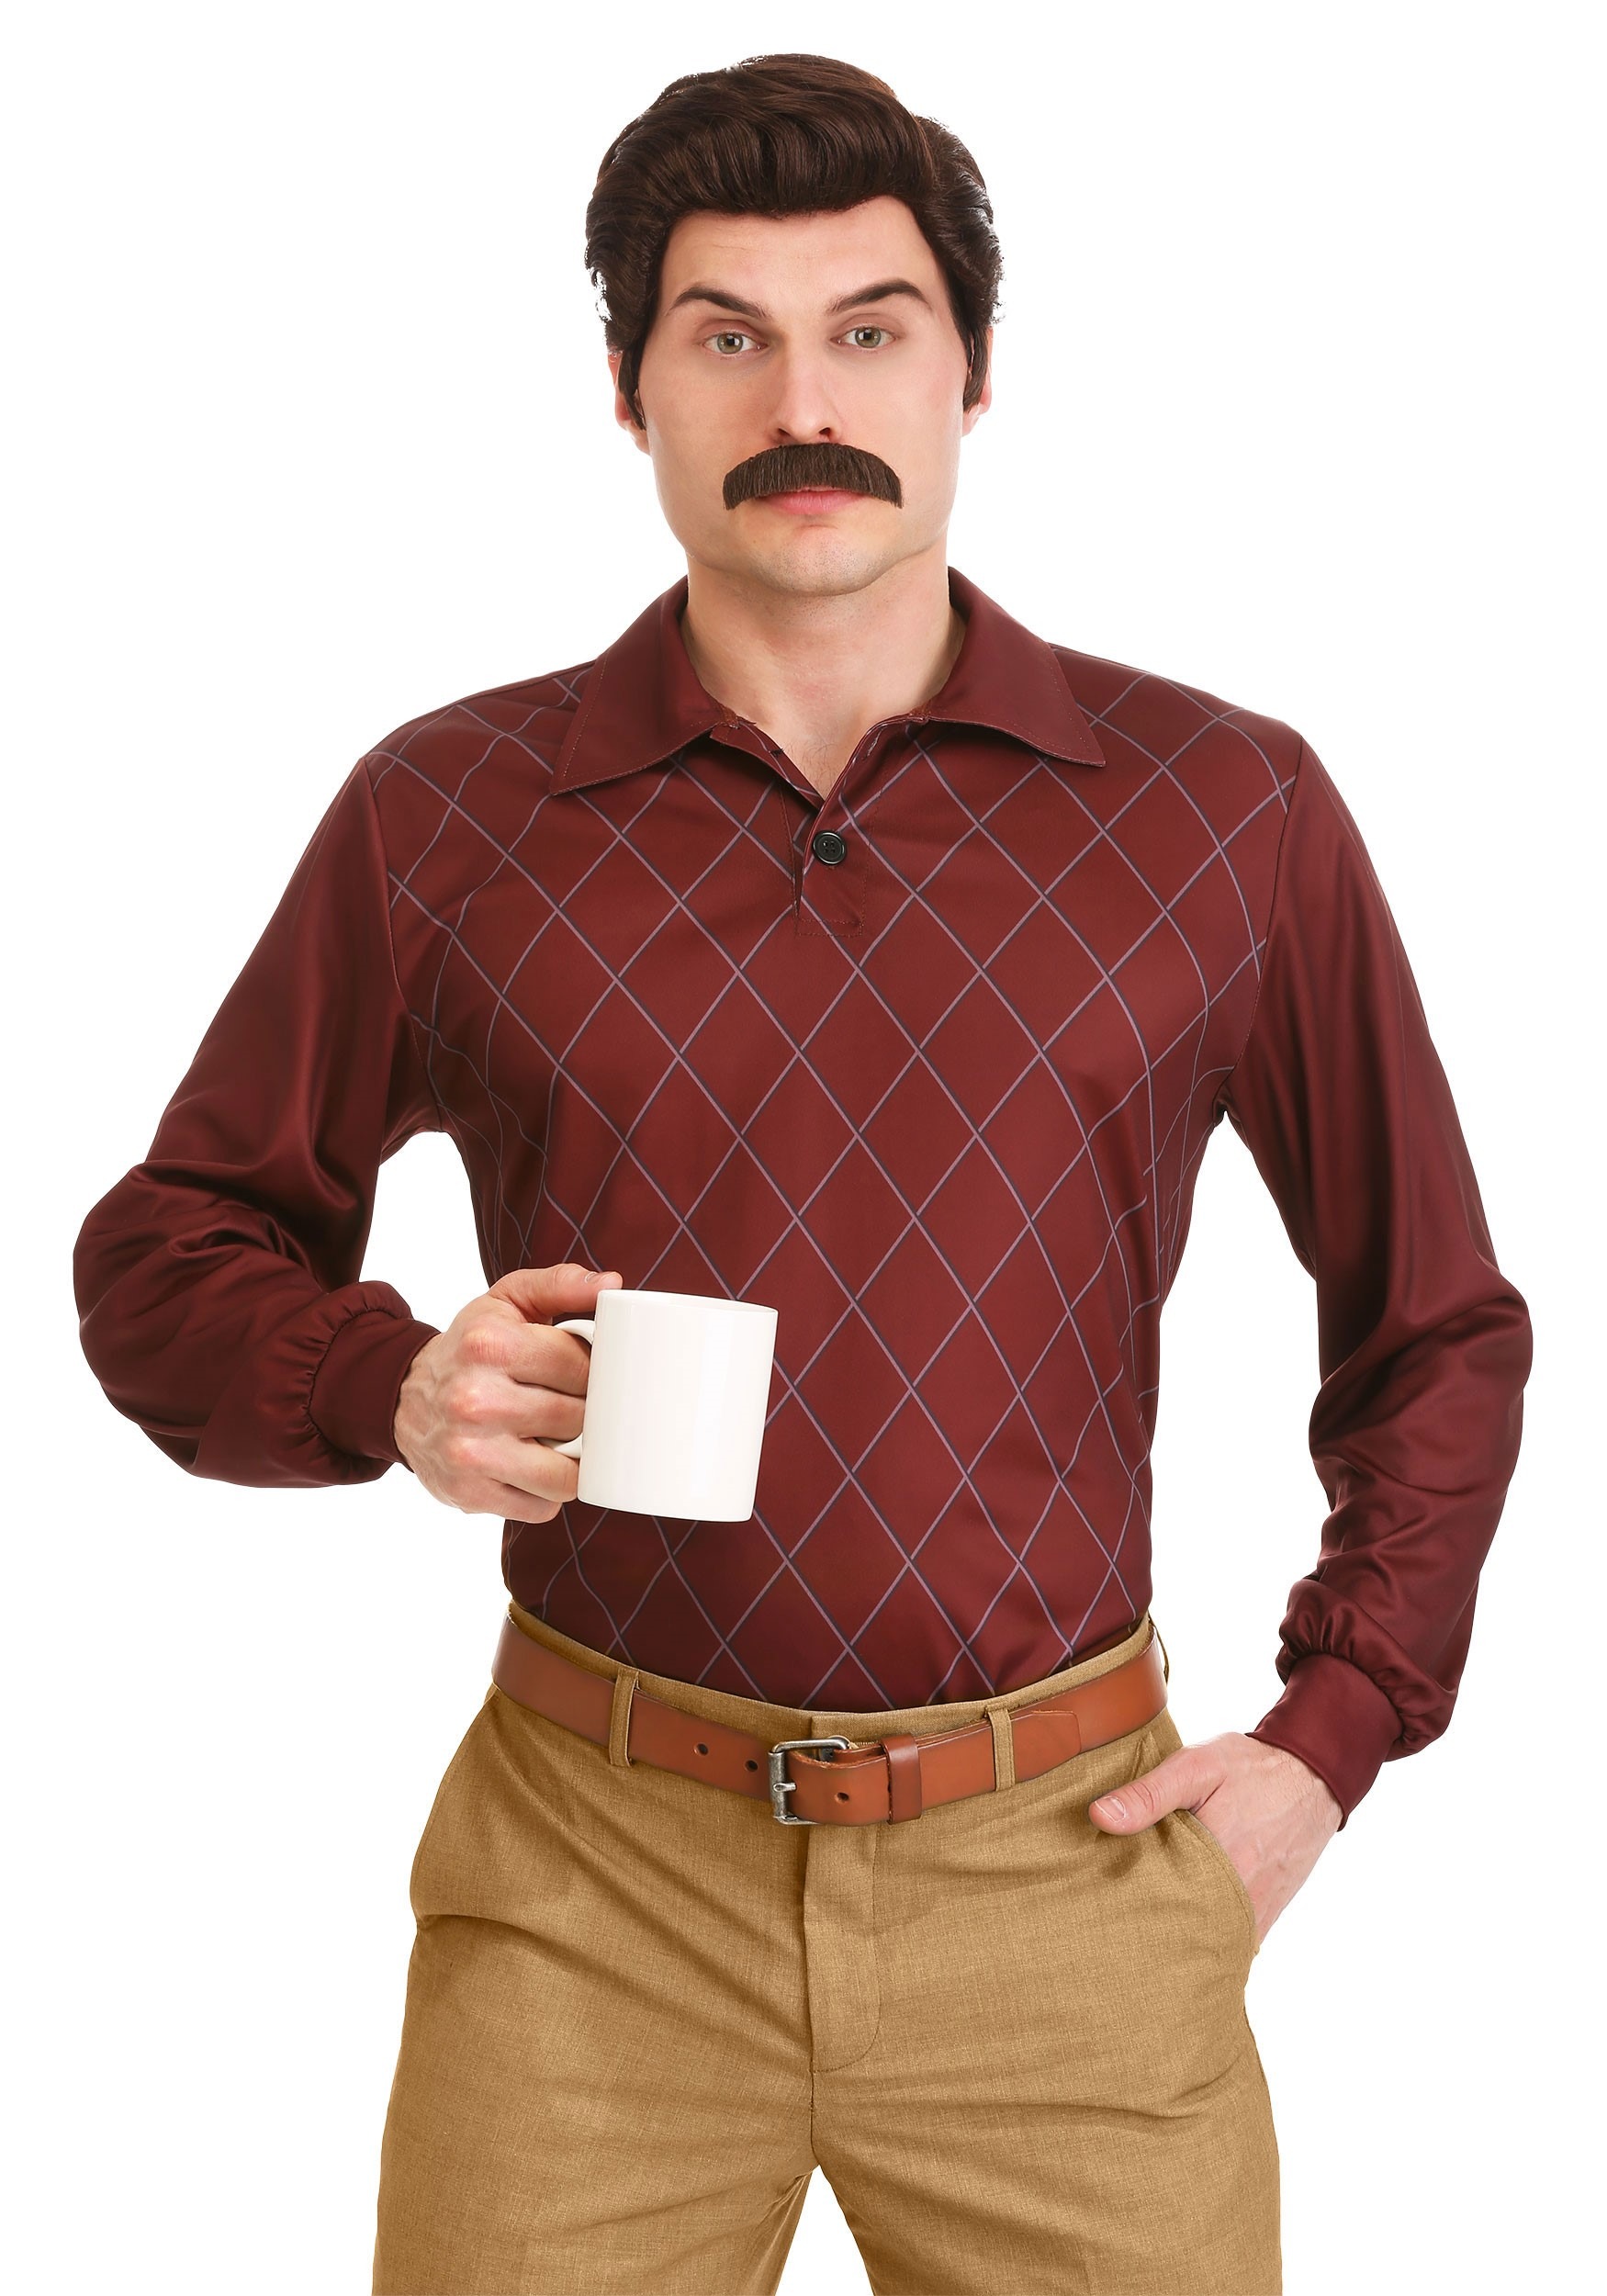 Plus Size Parks and Recreation Ron Swanson Costume